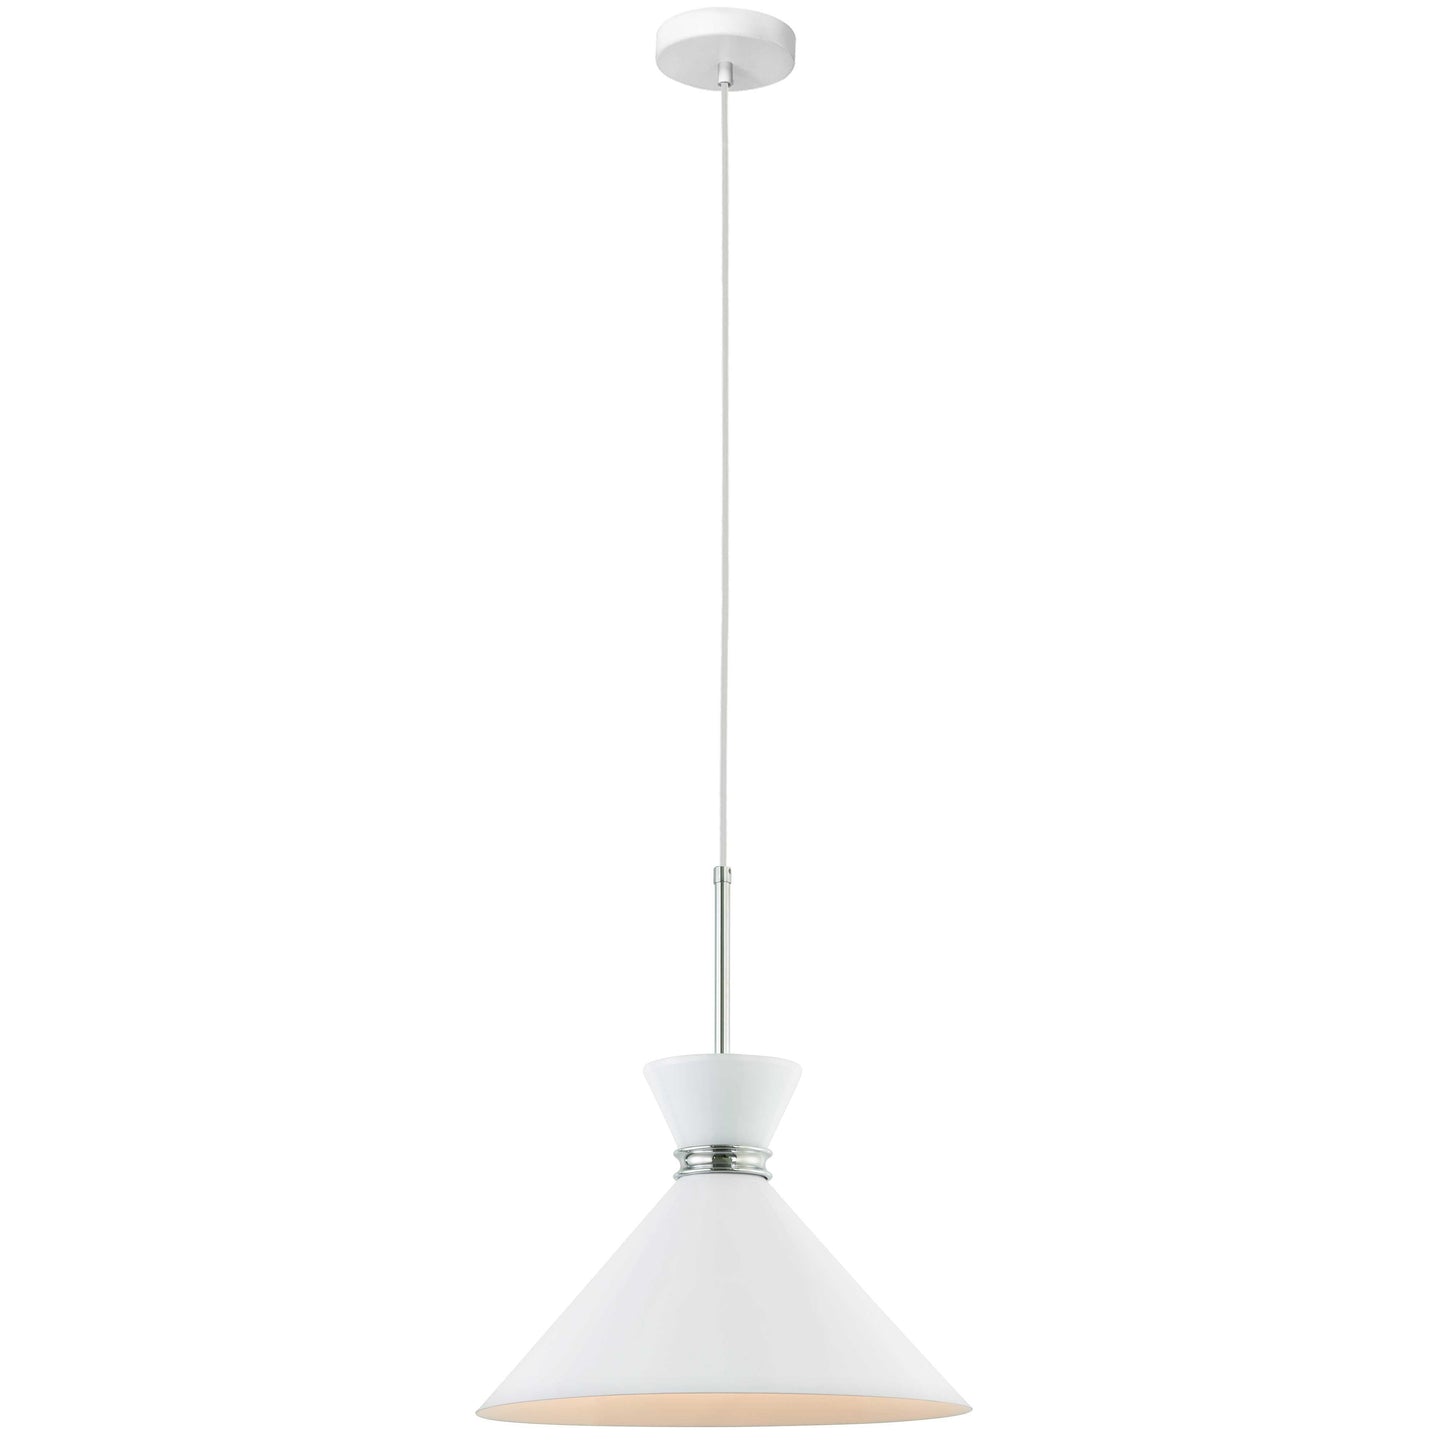 Dainolite 1 Light Incandescent Pendant, Gloss White Shade with Polished Chrome Accent